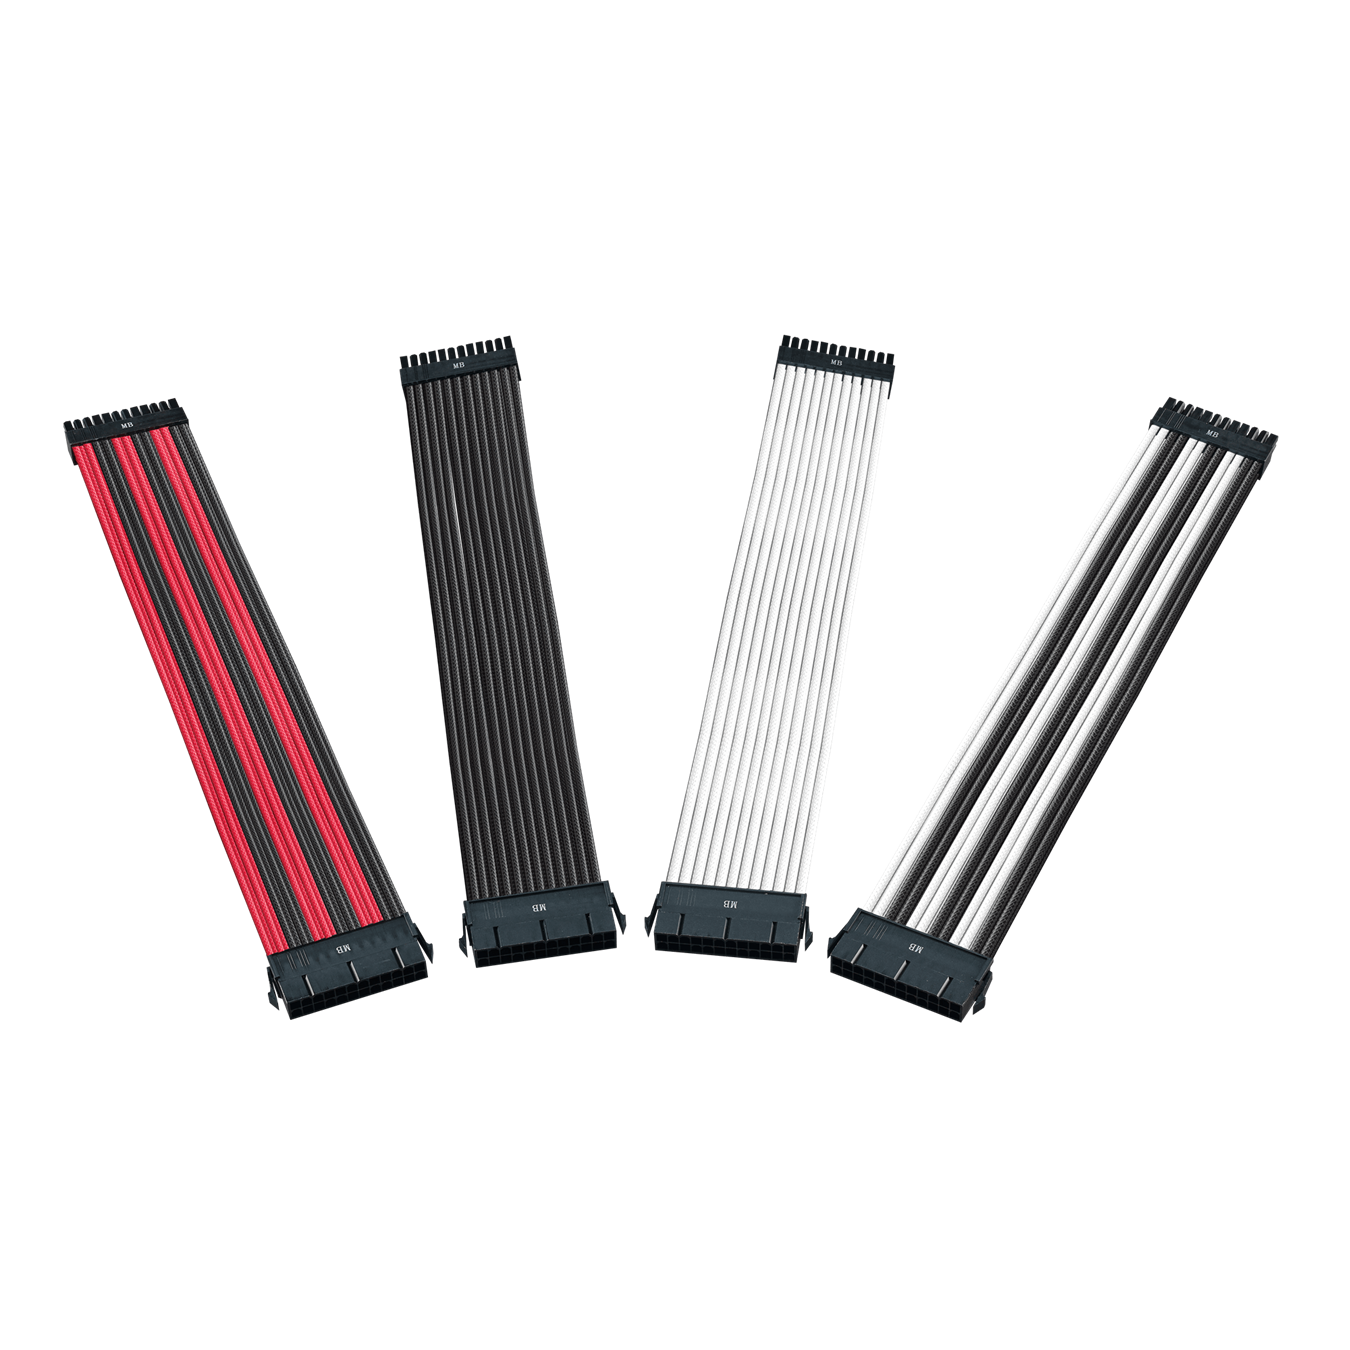 The Colored Extension Cable Kit currently comes in 4 available color options : Black / White / White & Black / Red & Black.